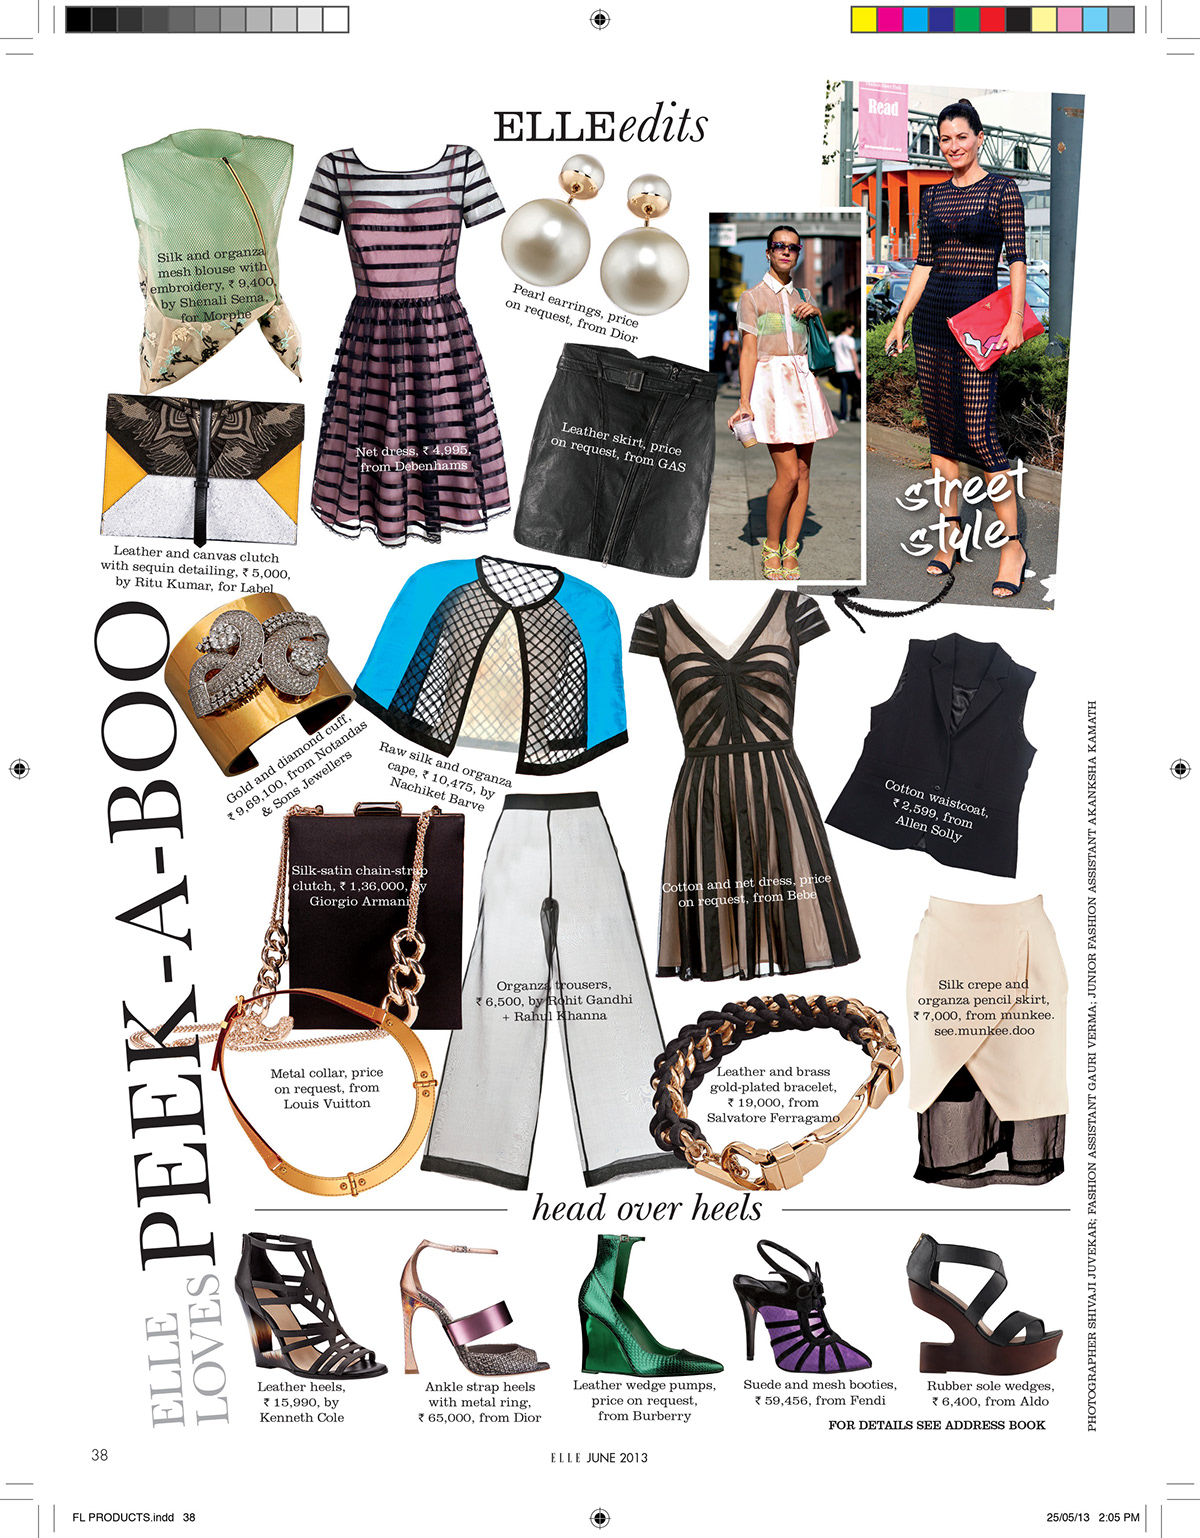 Elle india june 2013 first look Model/Product pages